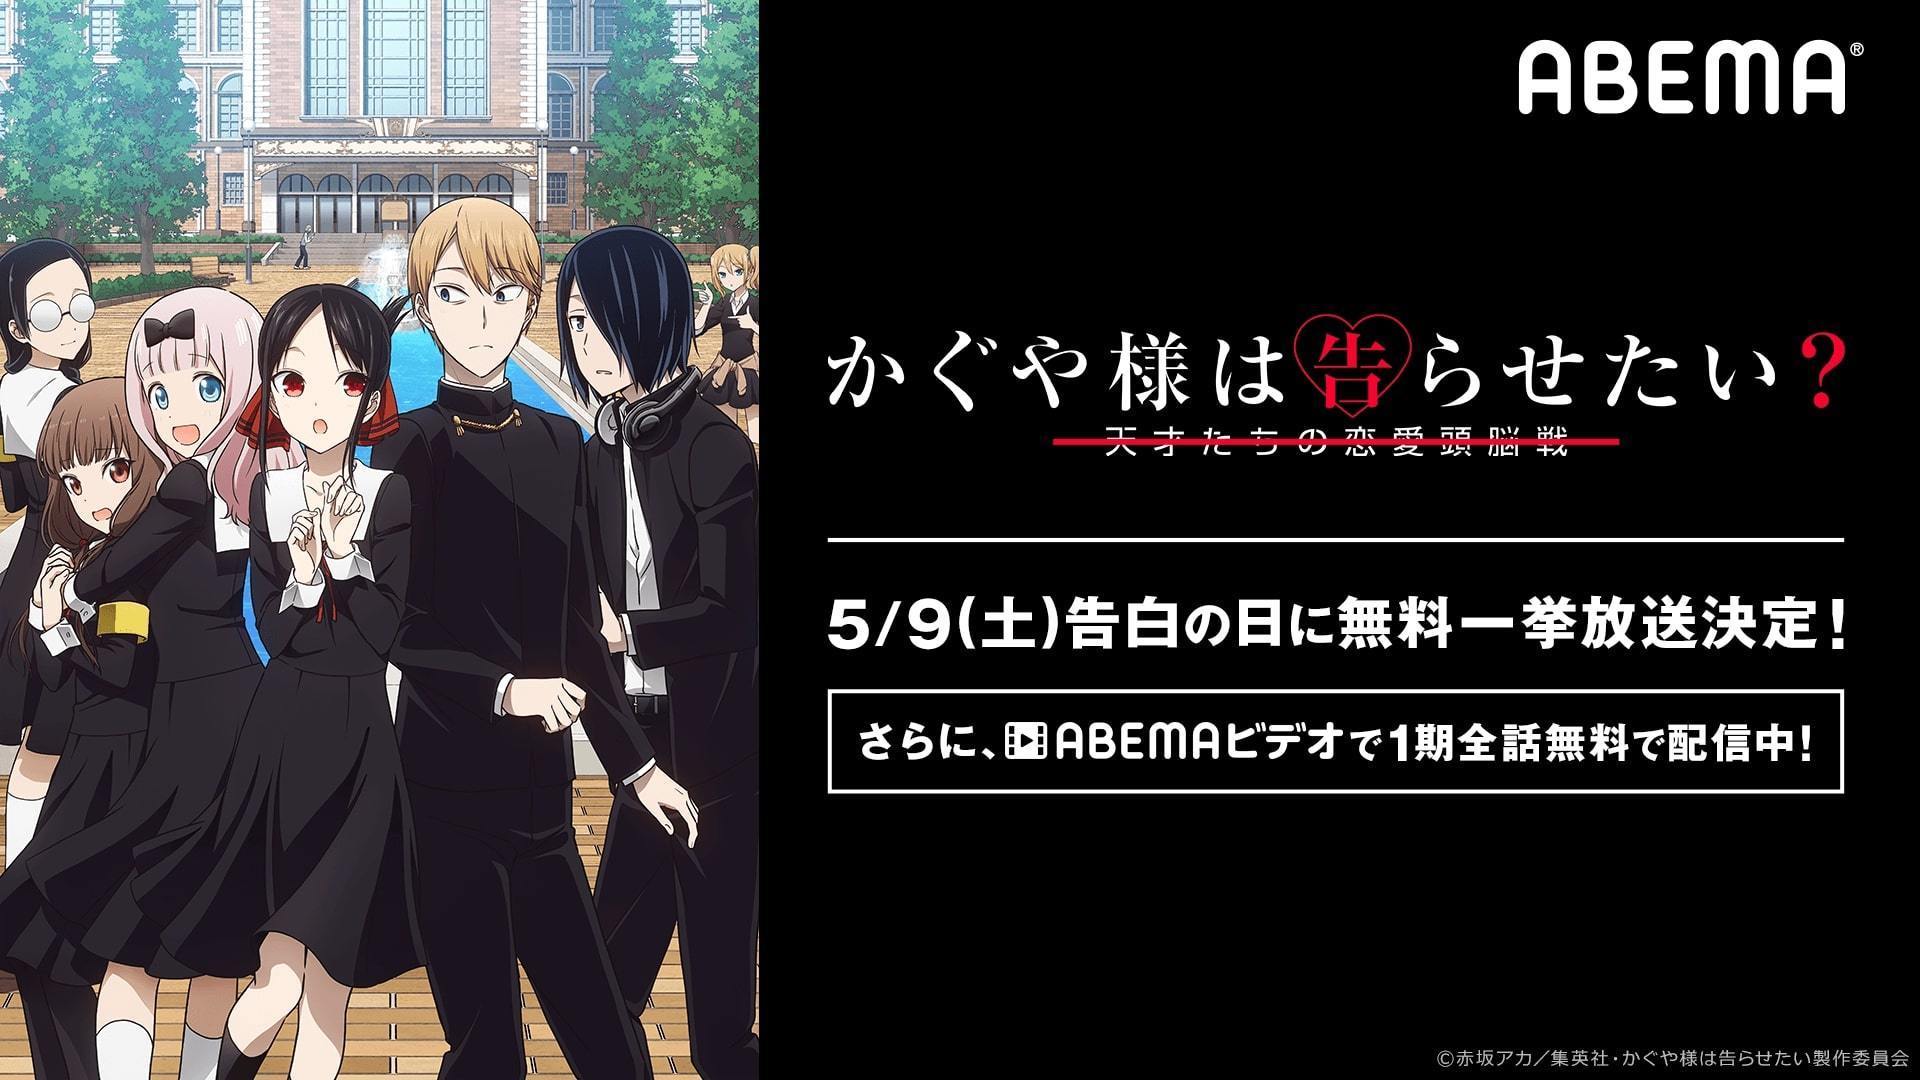 May 9 Confession Day Special Do You Want To Tell Kaguya Sama Retrospectives And Other Distributions Such As Grandchild Shonen Hanako Kun And Five Equal Brides Latest Japanese Anime Specials